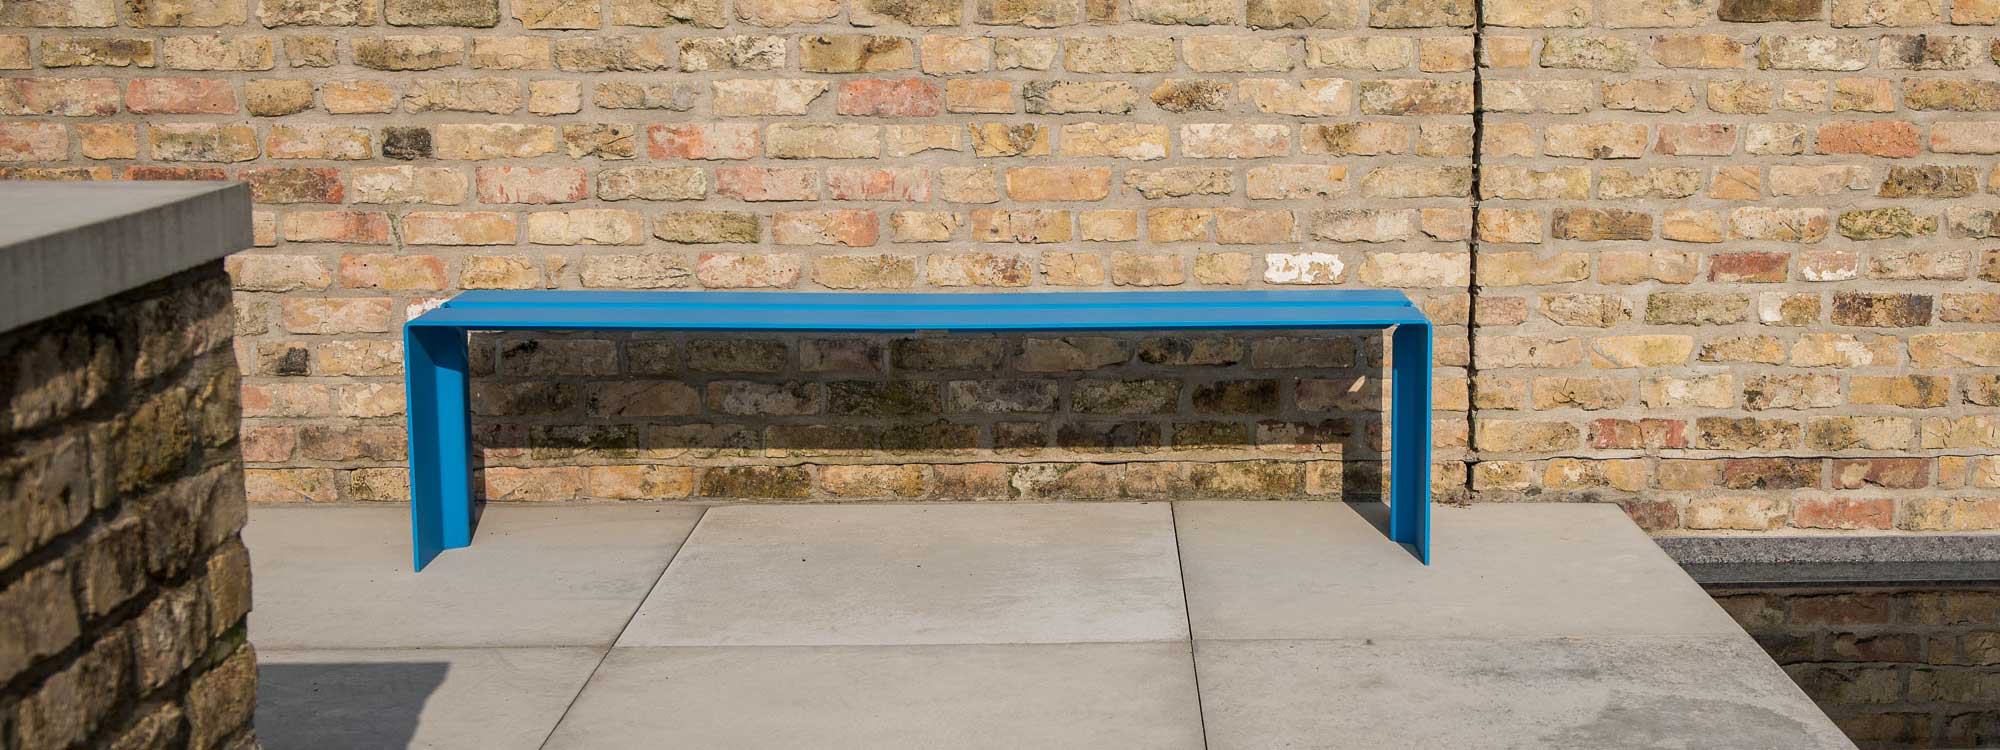 Image of Wünder's The Bended modern garden bench seat in Blue RAL 5012 aluminium, with brick wall in the background